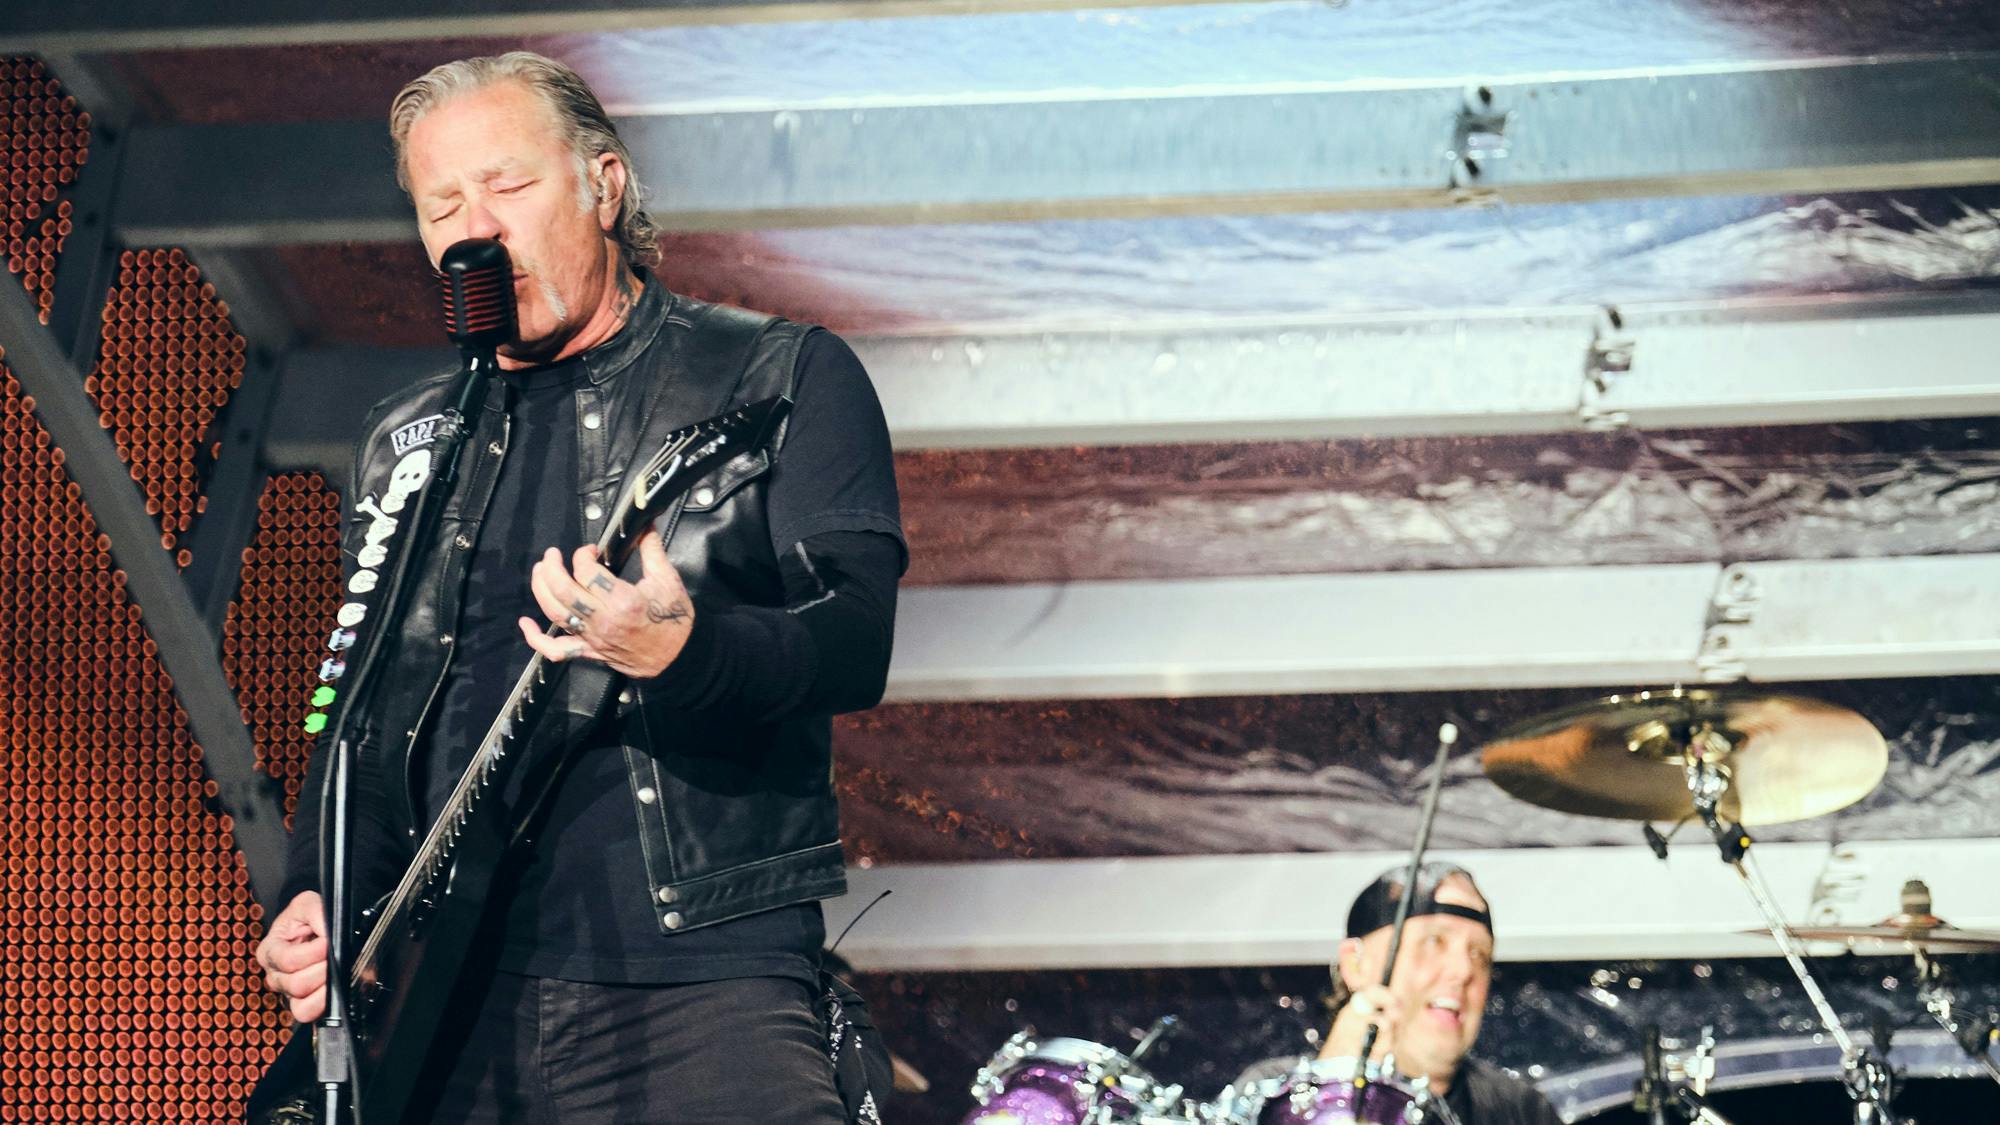 Metallica, KISS And twenty one pilots Among 2019's Highest-Grossing Tours So Far